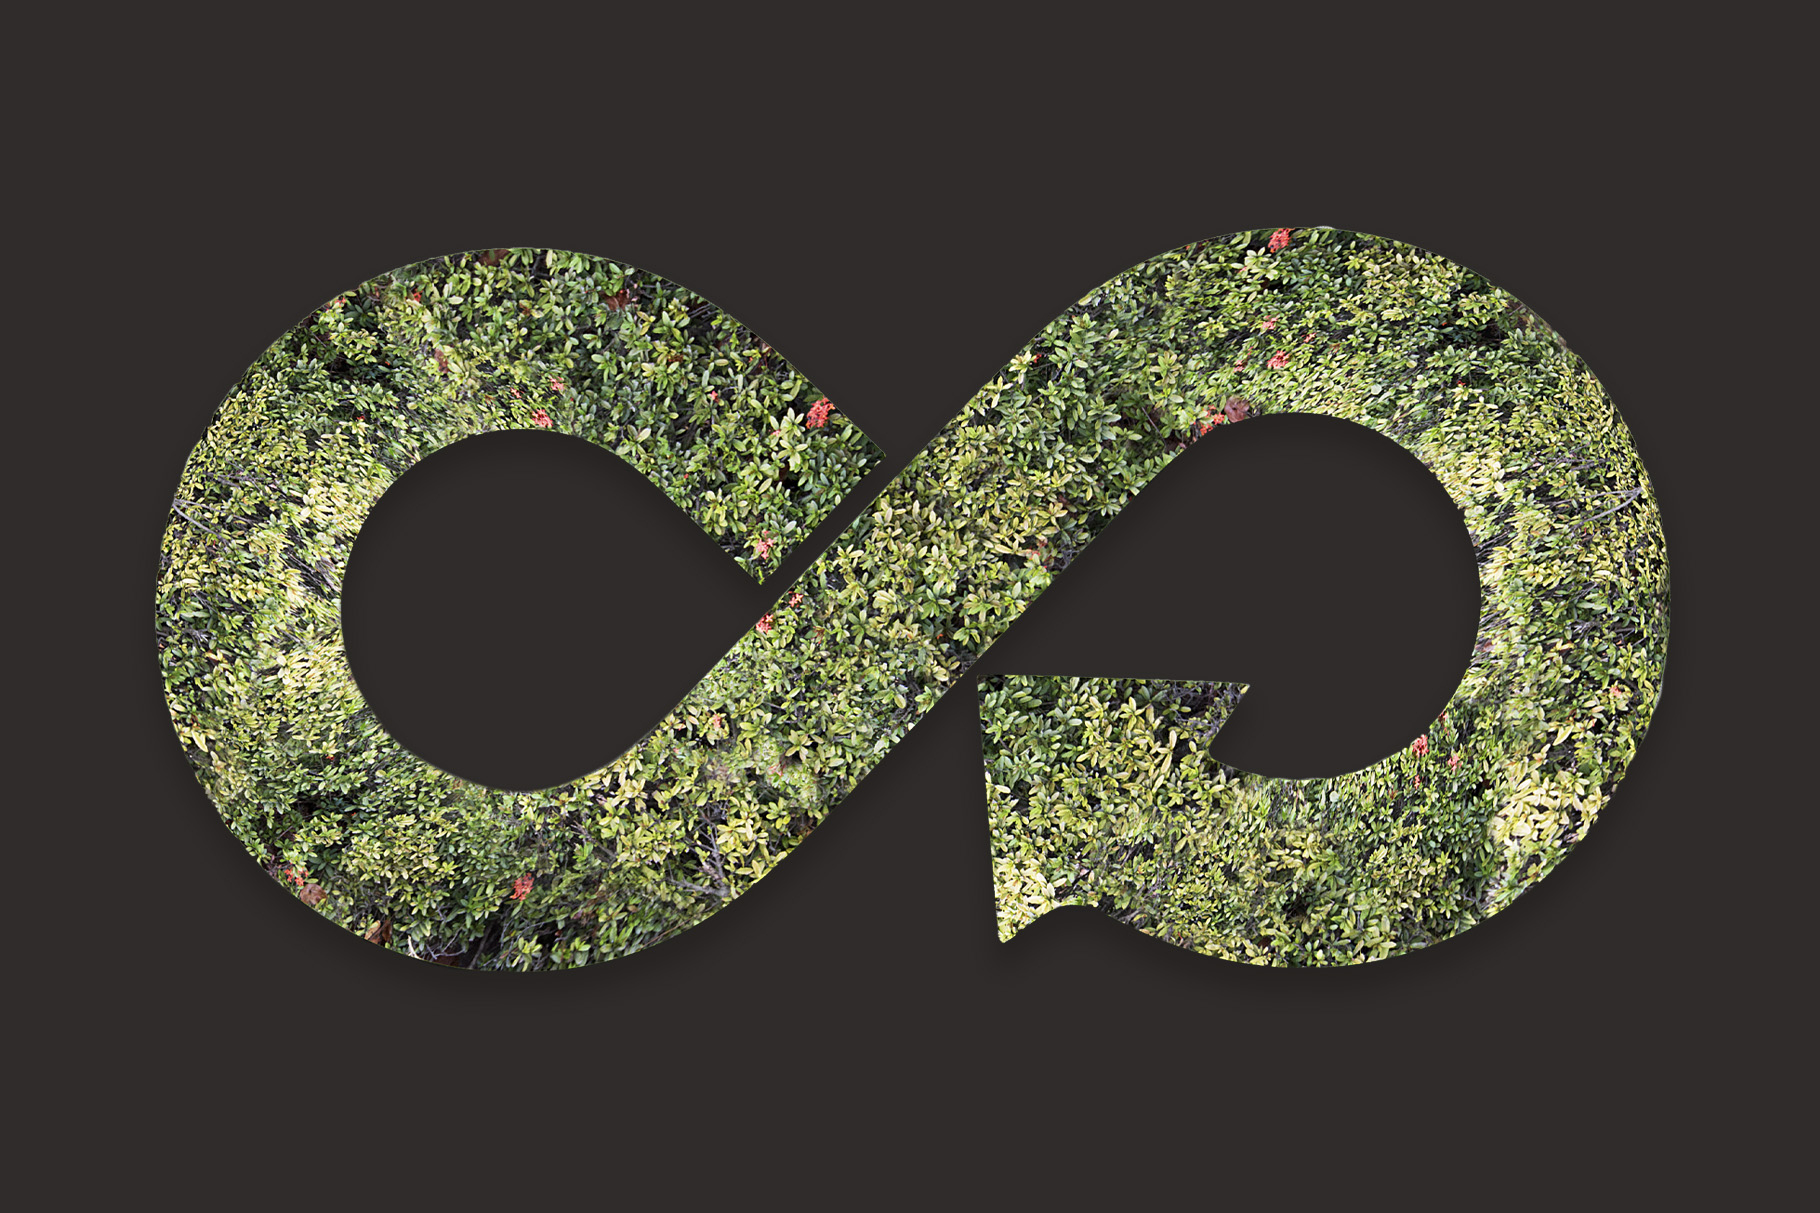 Infinity symbol in the form of an arrow made of plants